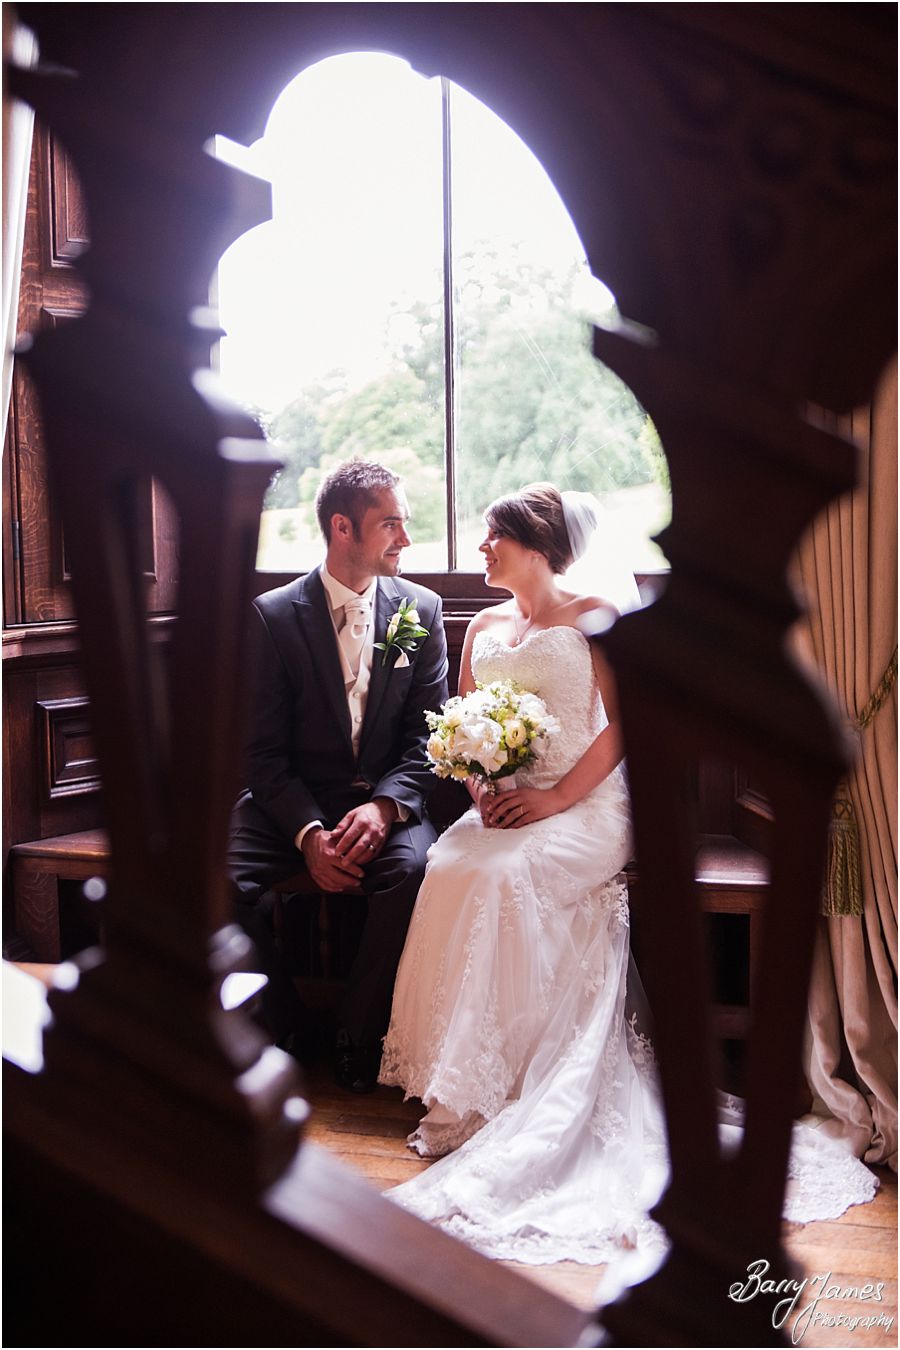 Timeless portraits on the staircase at Sandon Hall in Staffordshire by Recommended Wedding Photographer Barry James